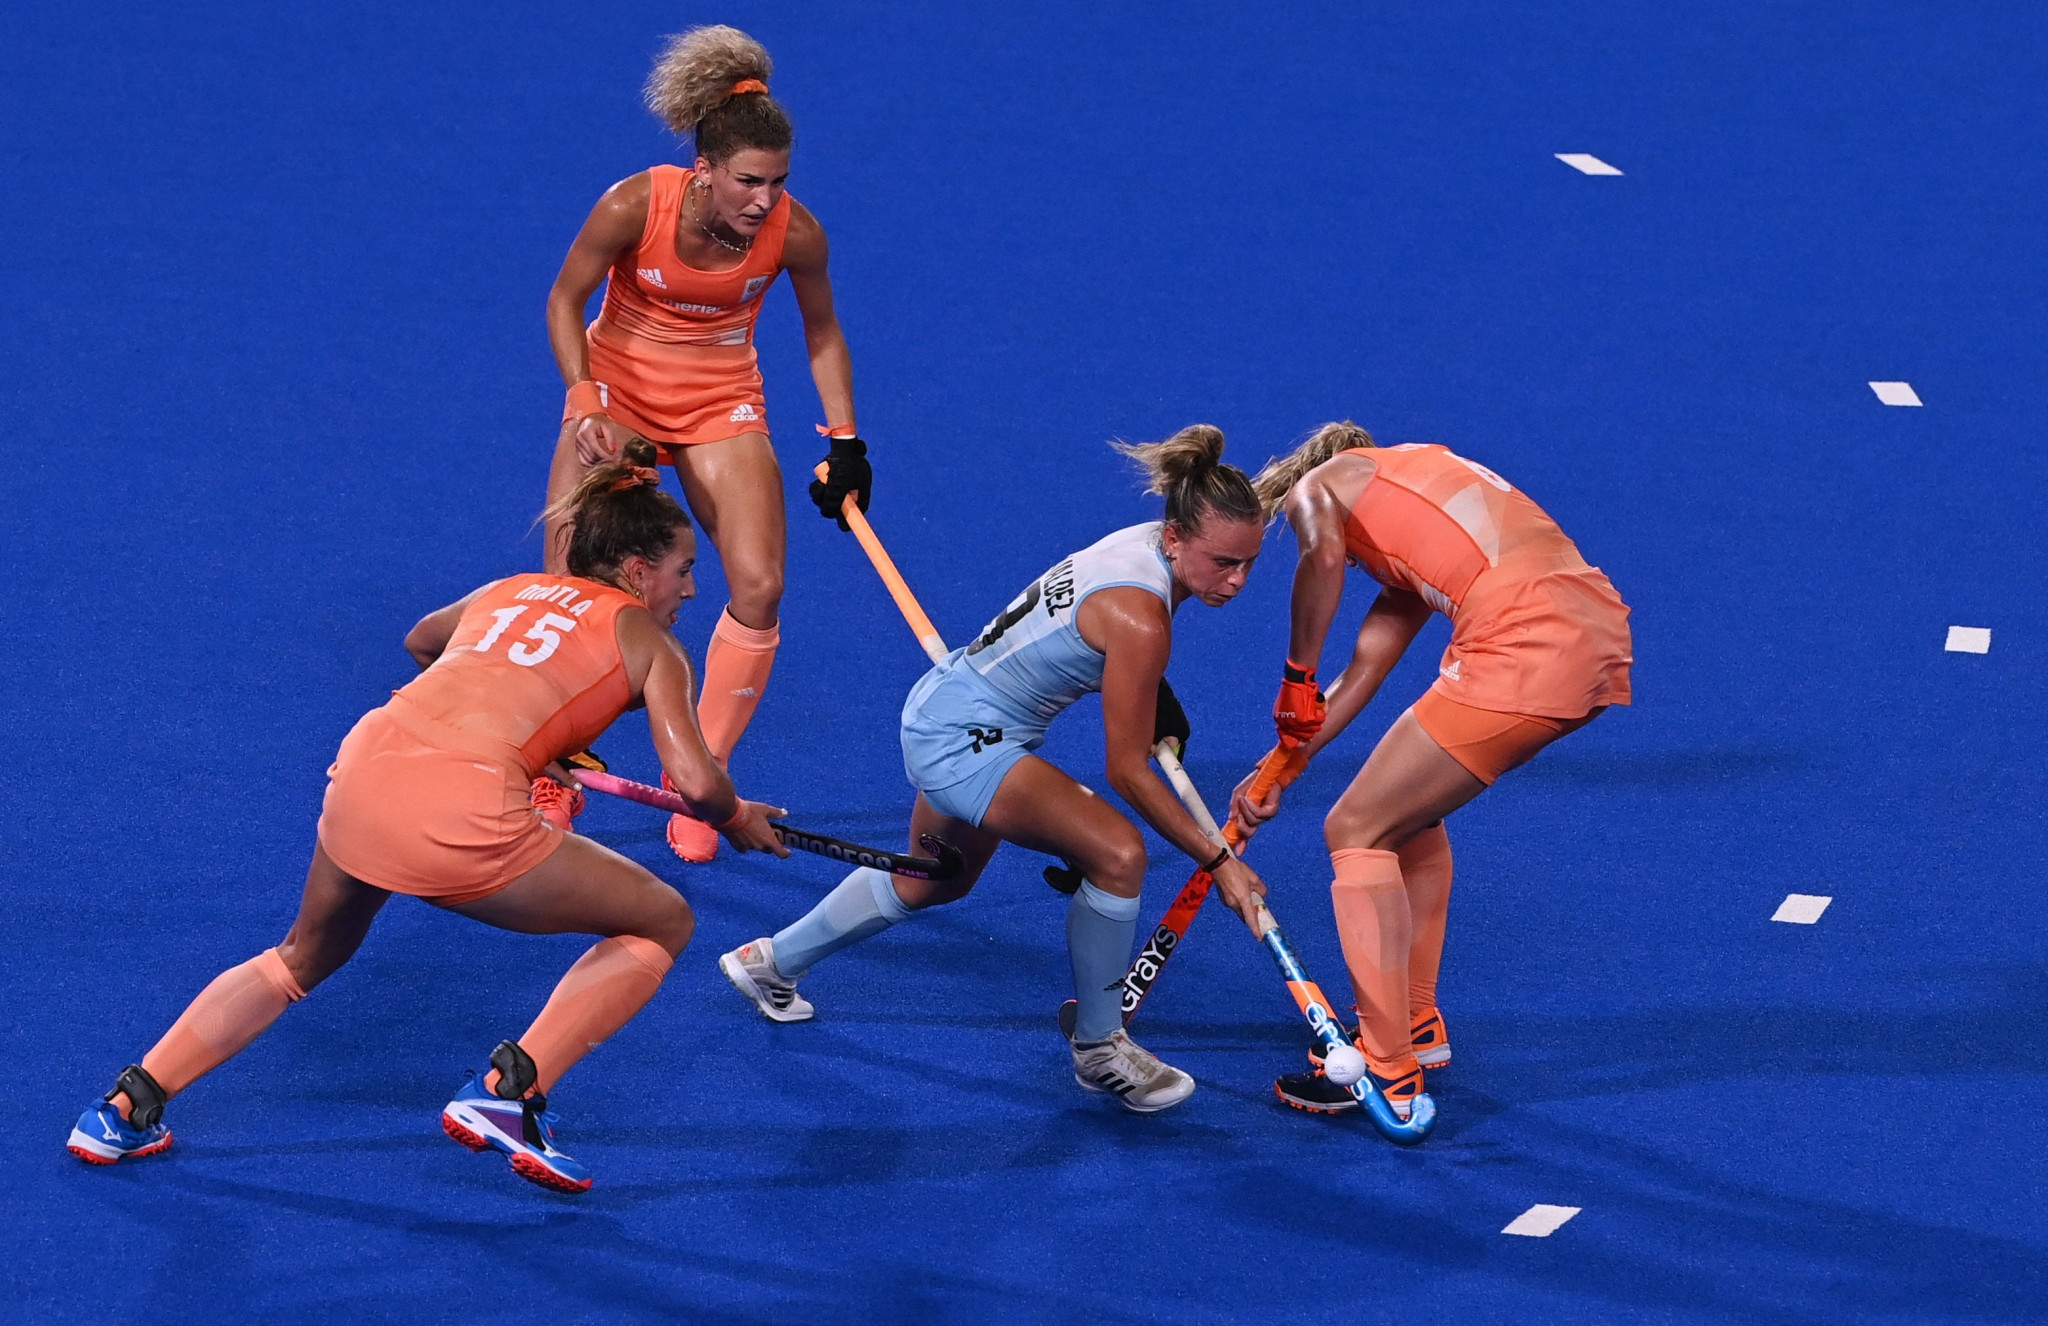 FIH opens broadcast rights bidding process for major hockey events